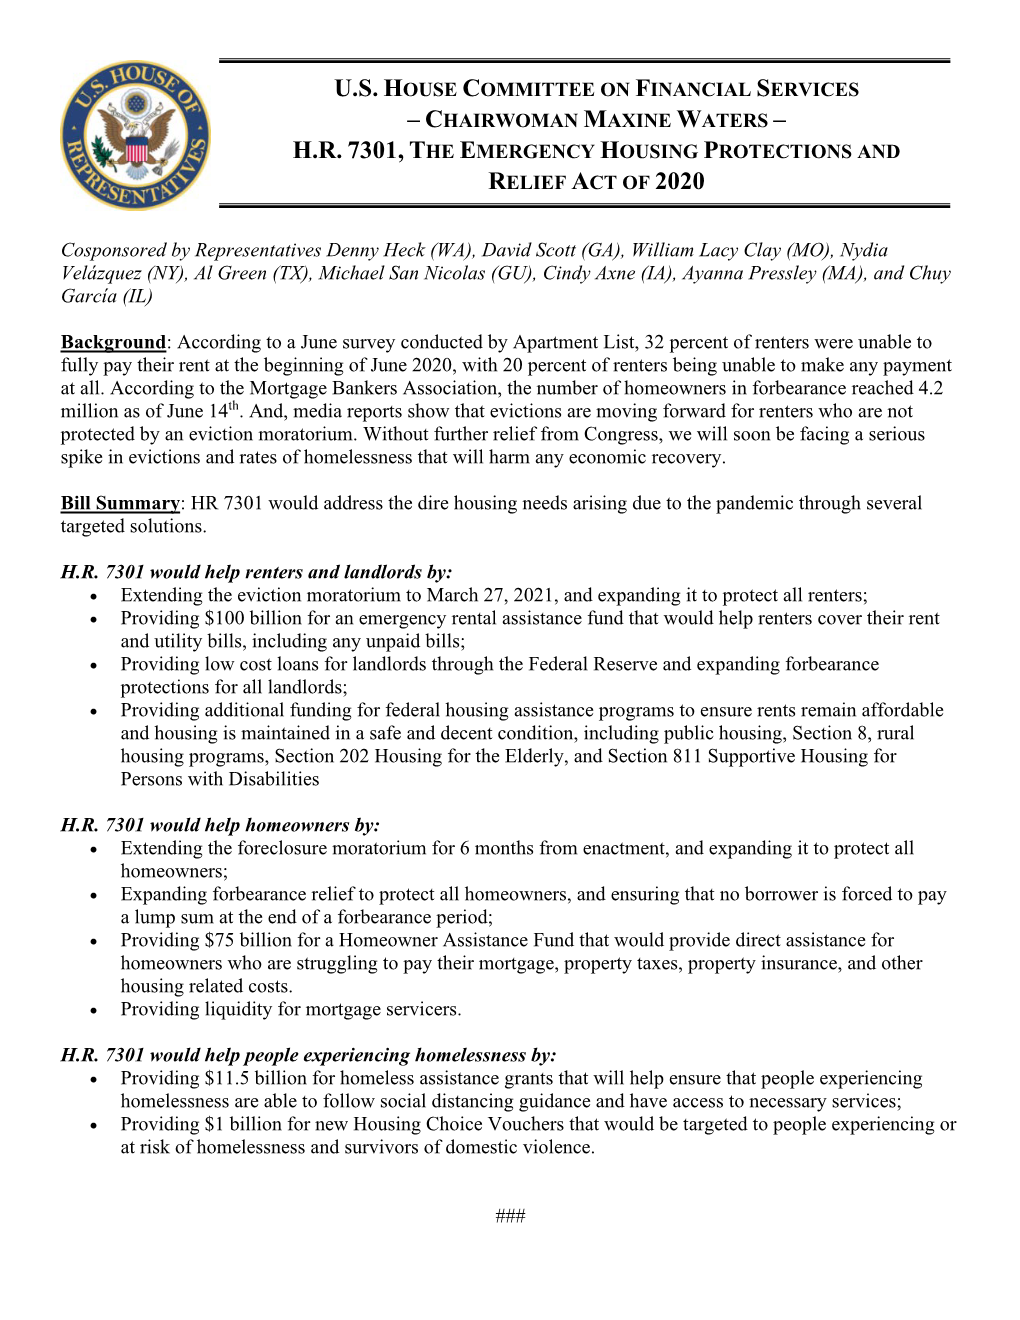 Hr 7301, the Emergency Housing Protections and Relief Act of 2020